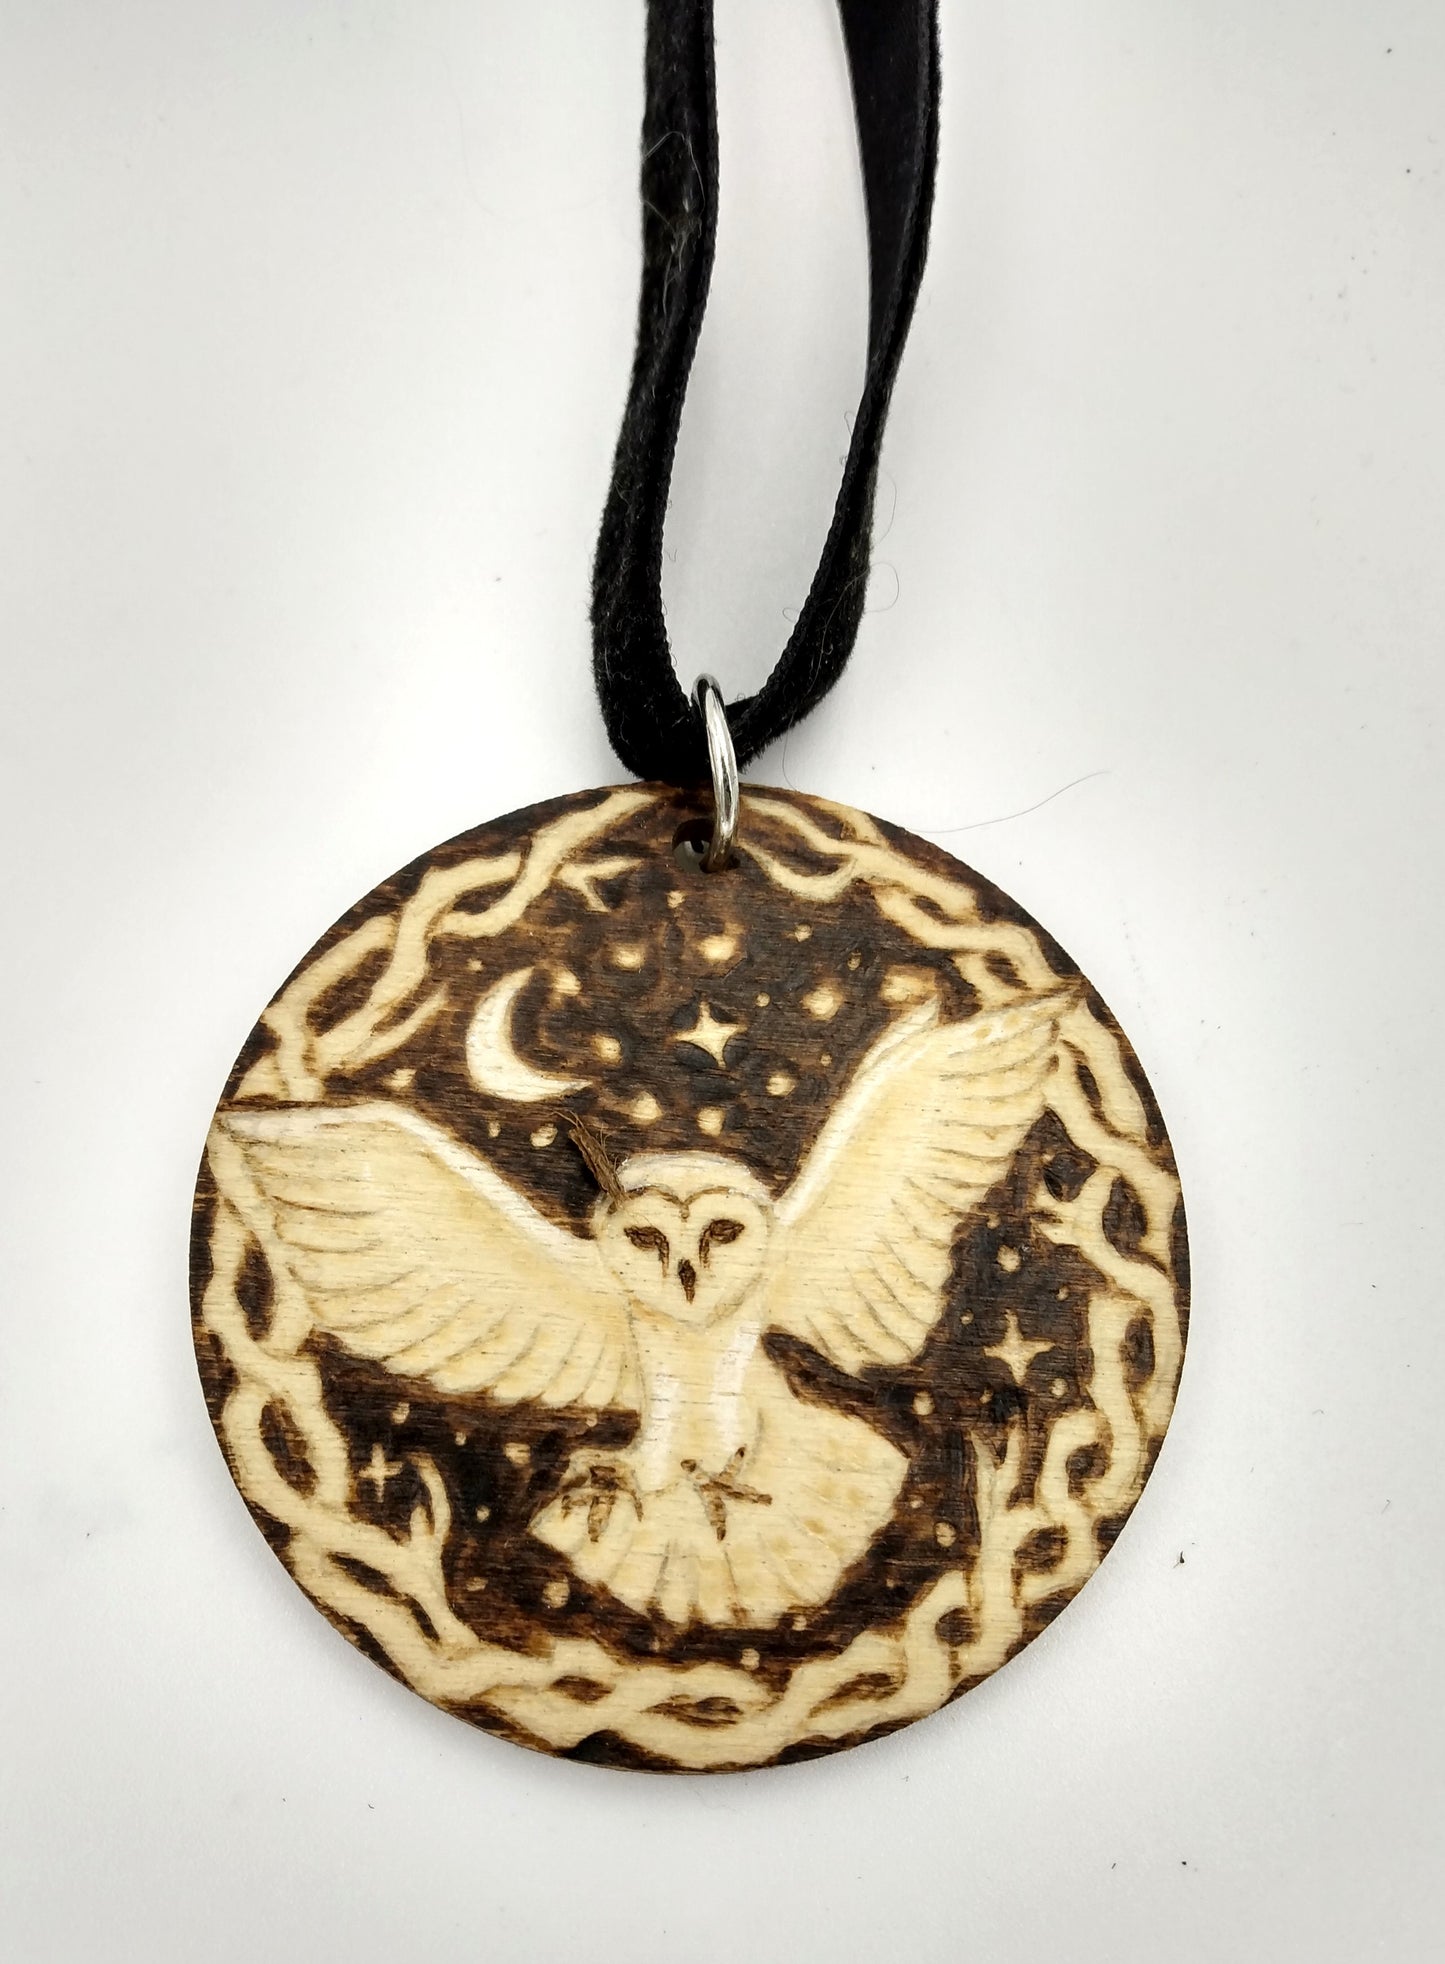 Wood Burned and Painted Necklaces